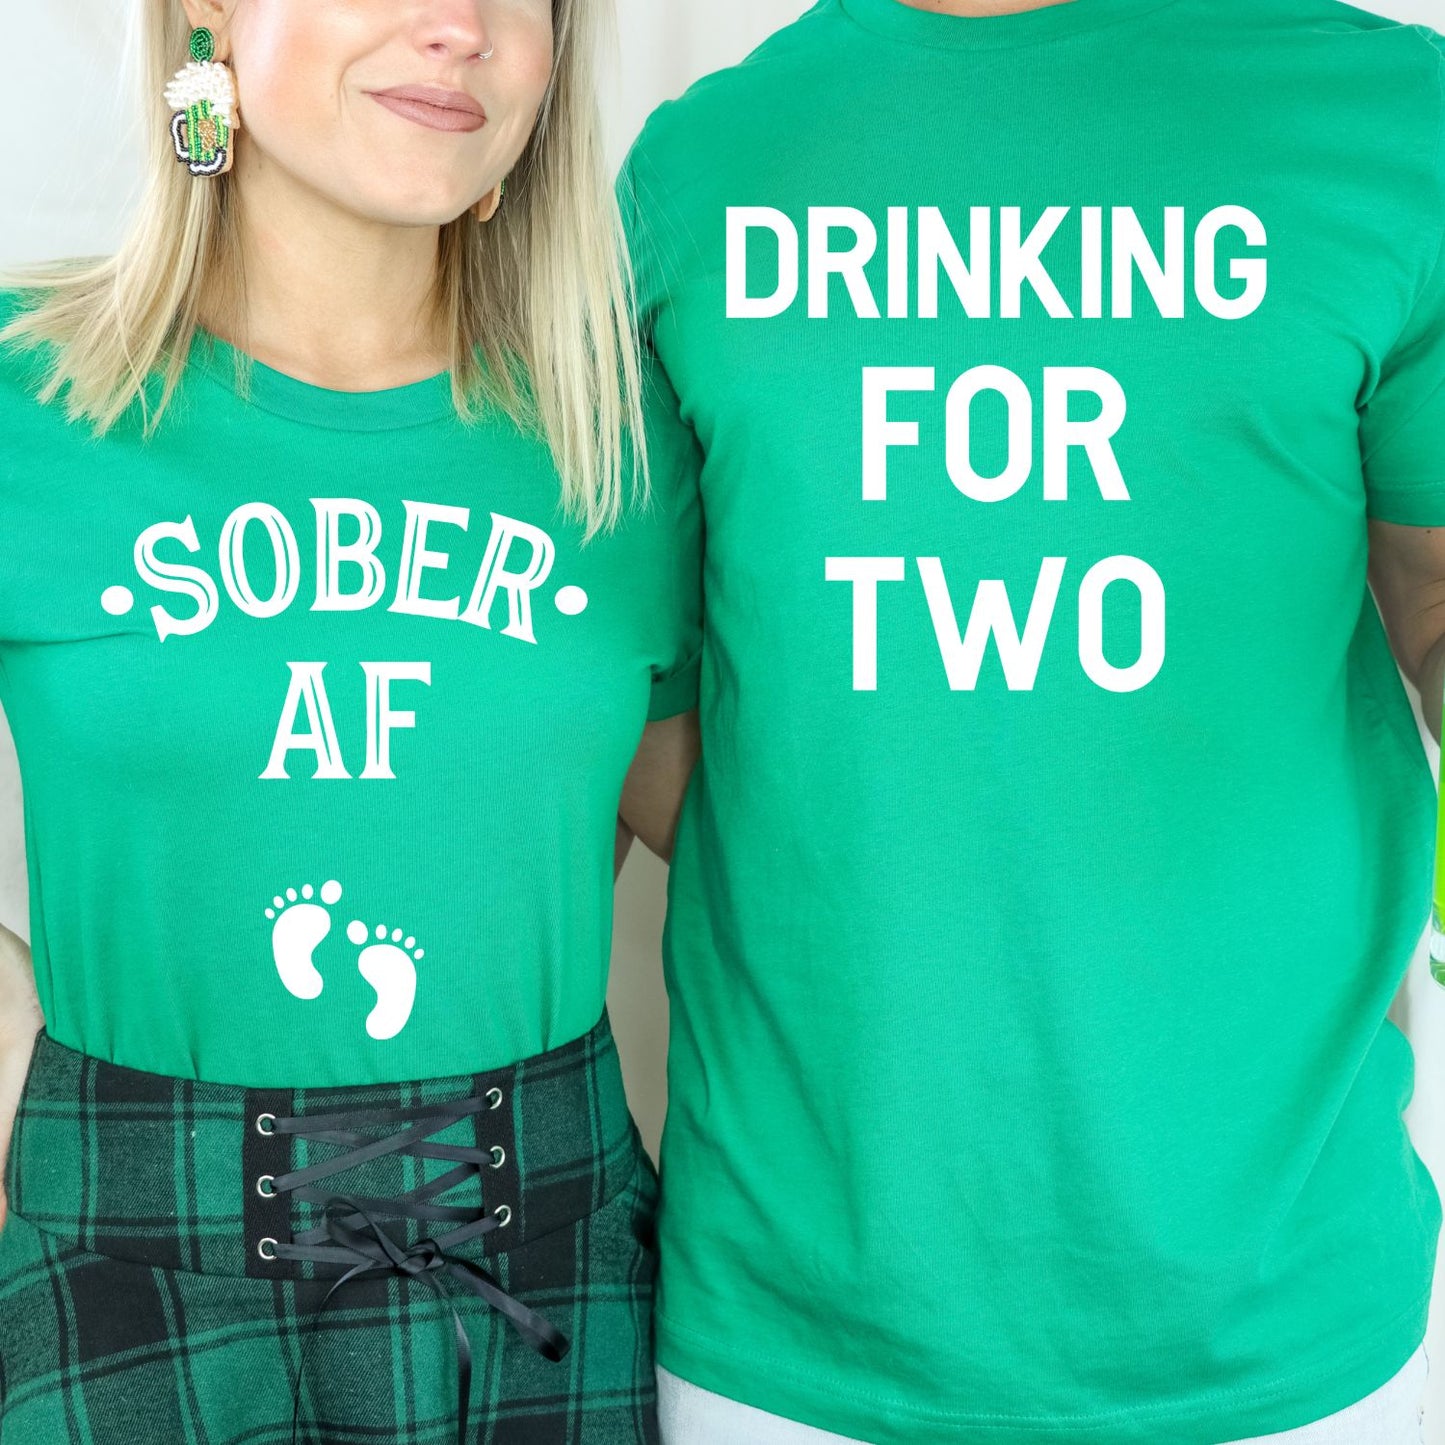 DRINKING FOR TWO - SOBER AF - Funny St. Paddy's Day - Pregnancy Announcement Shirt